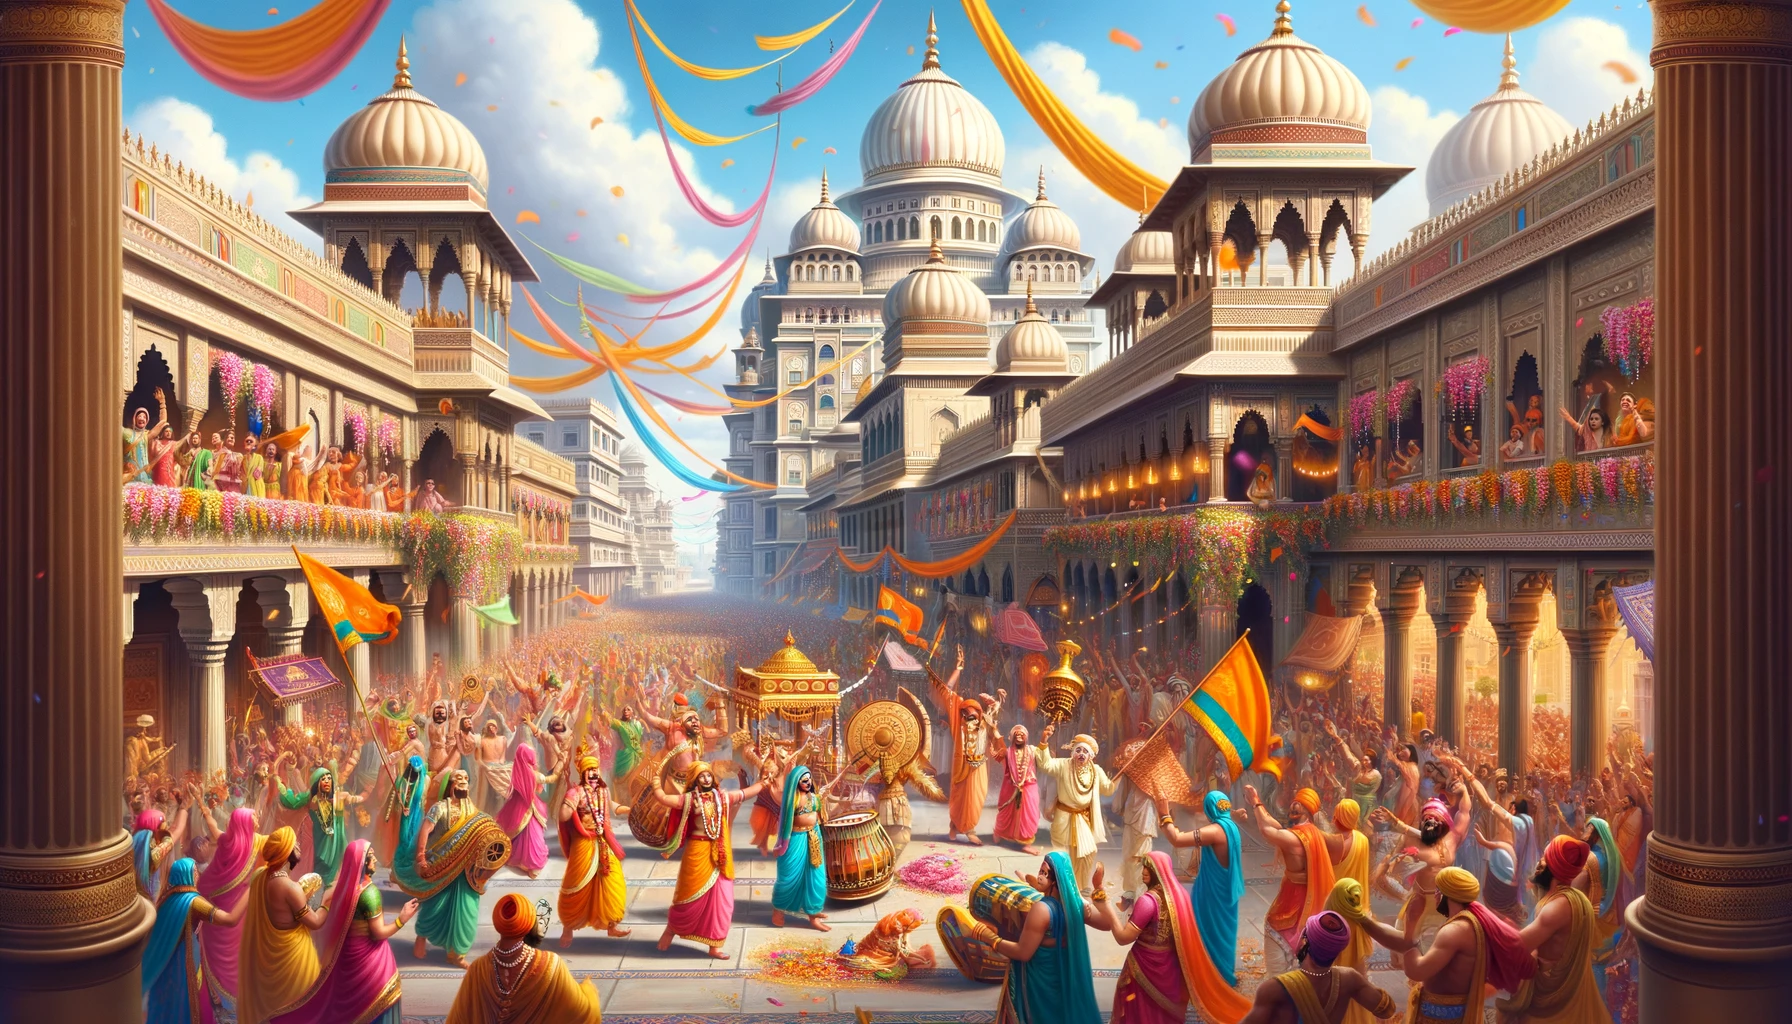 The Citizens of Ayodhya Rejoice